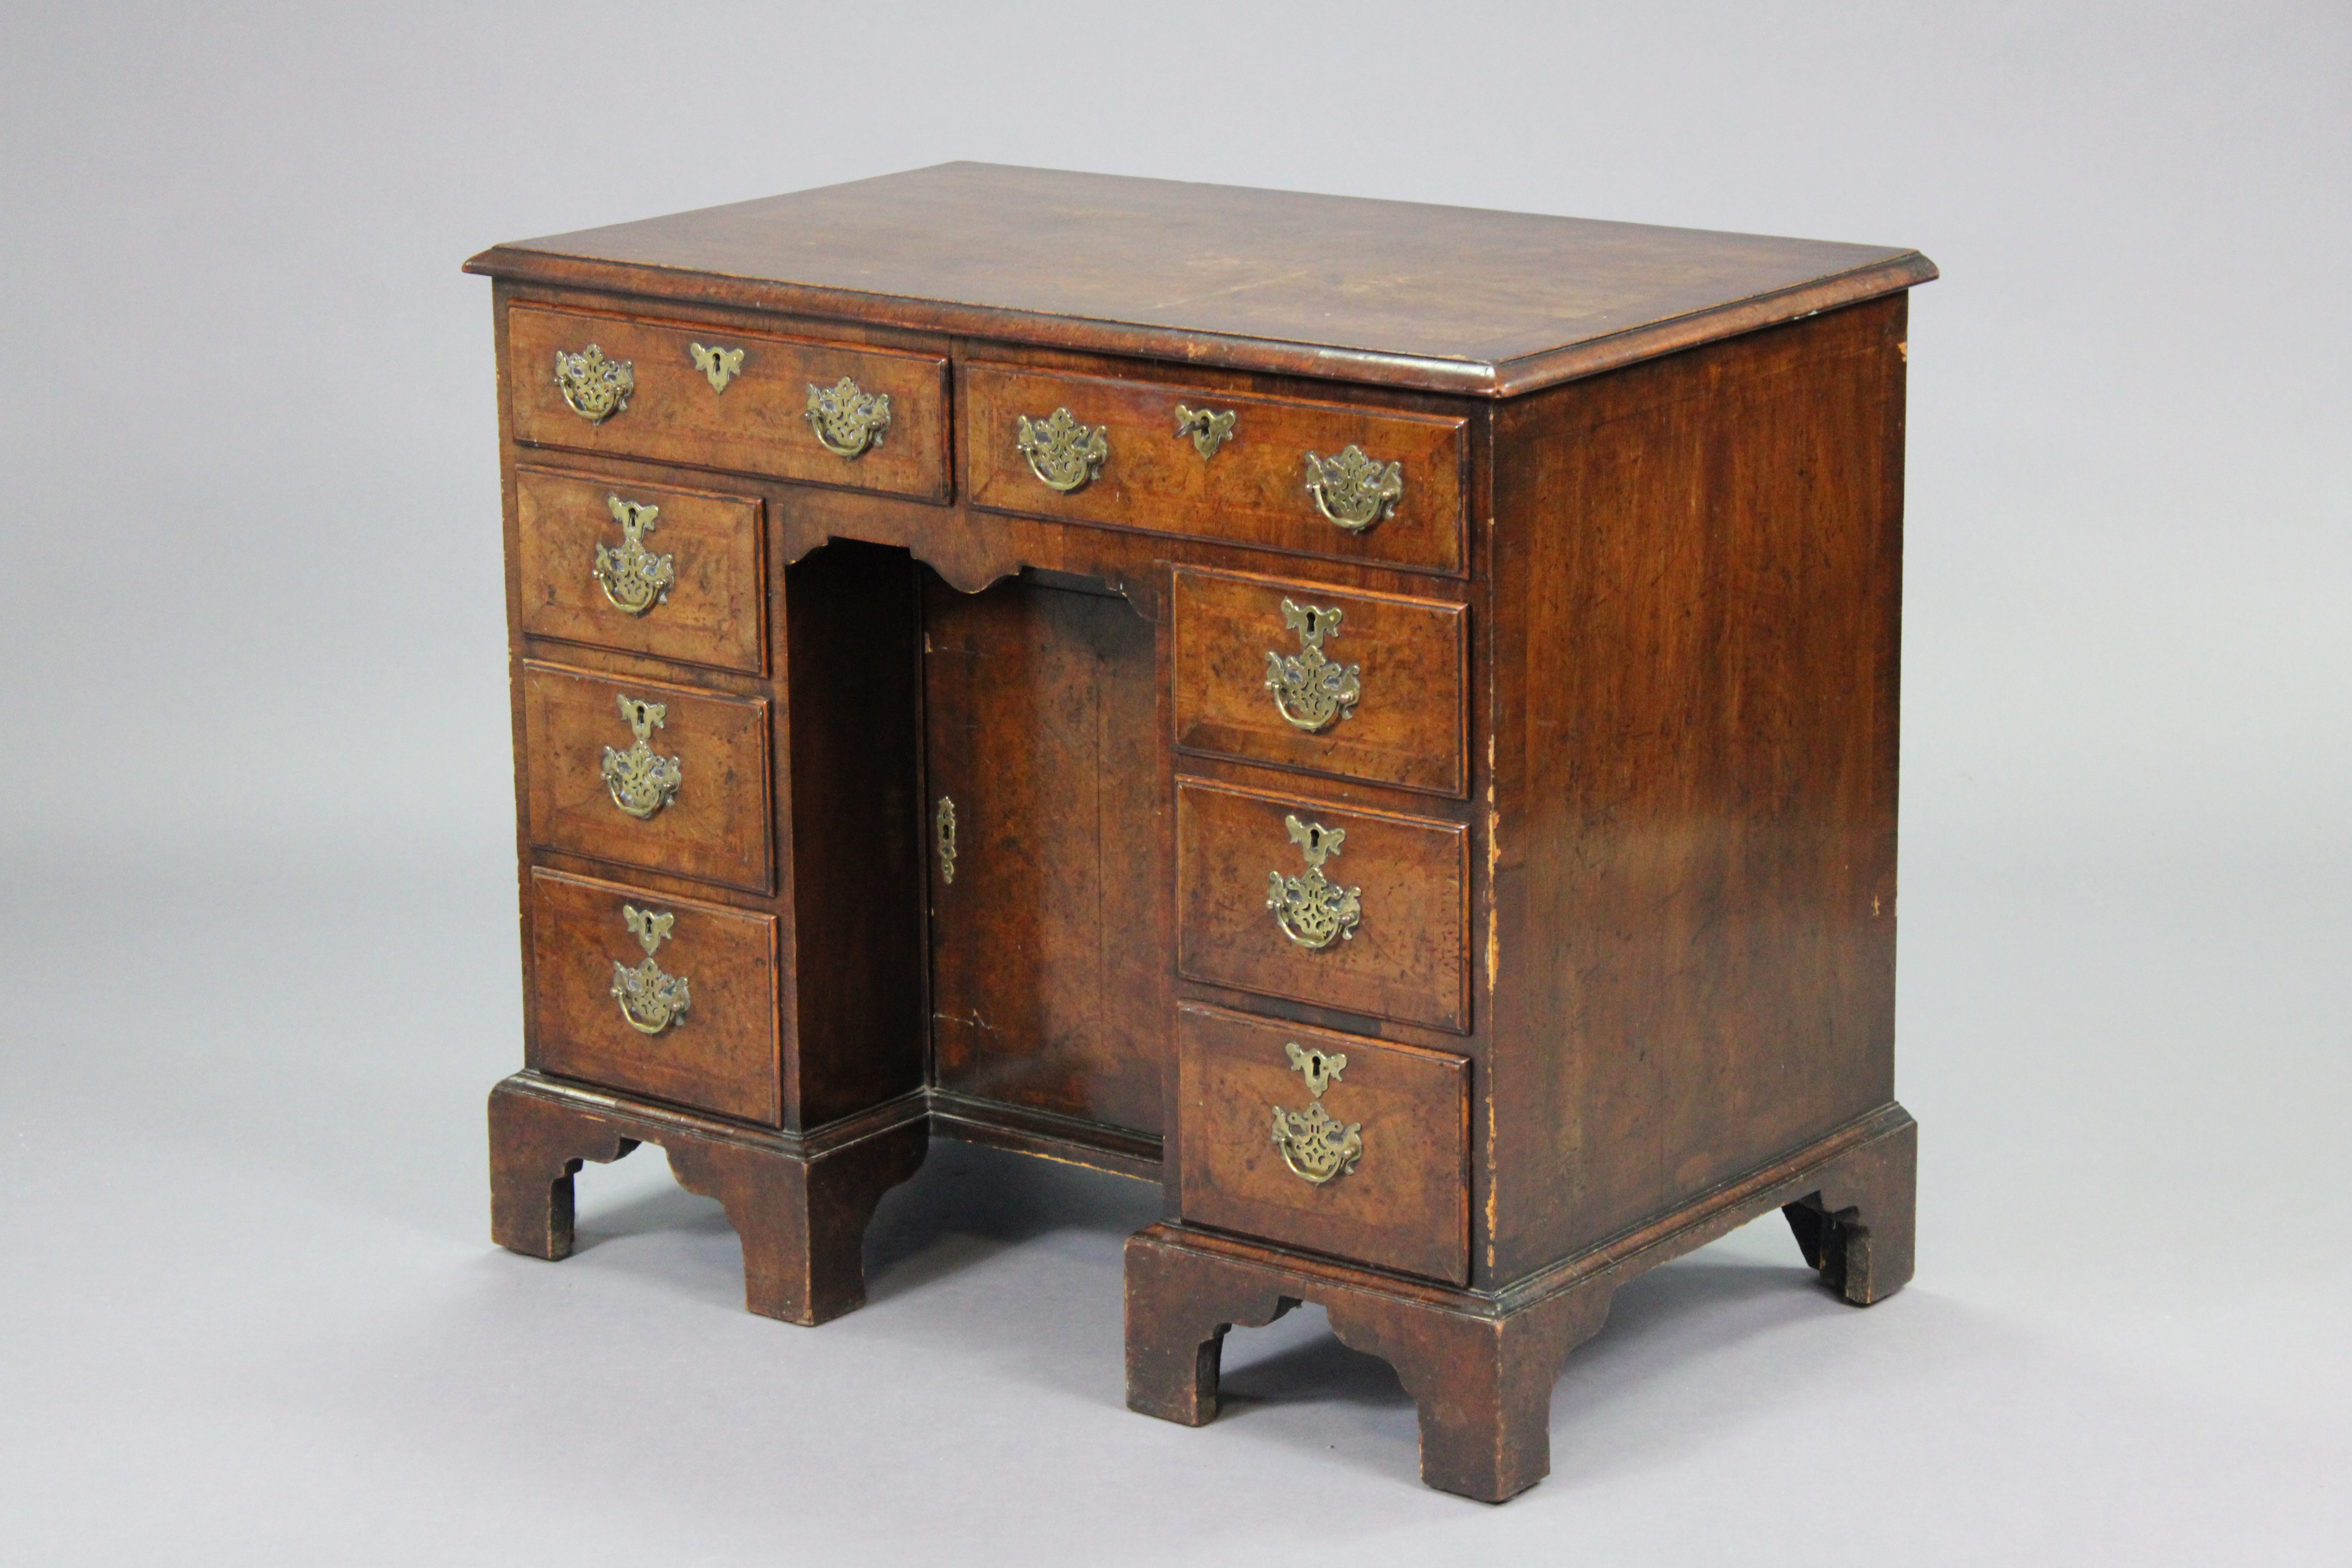 A Georgian walnut knee-hole desk with crossbanding & herring-bone inlay, fitted with an - Image 3 of 4